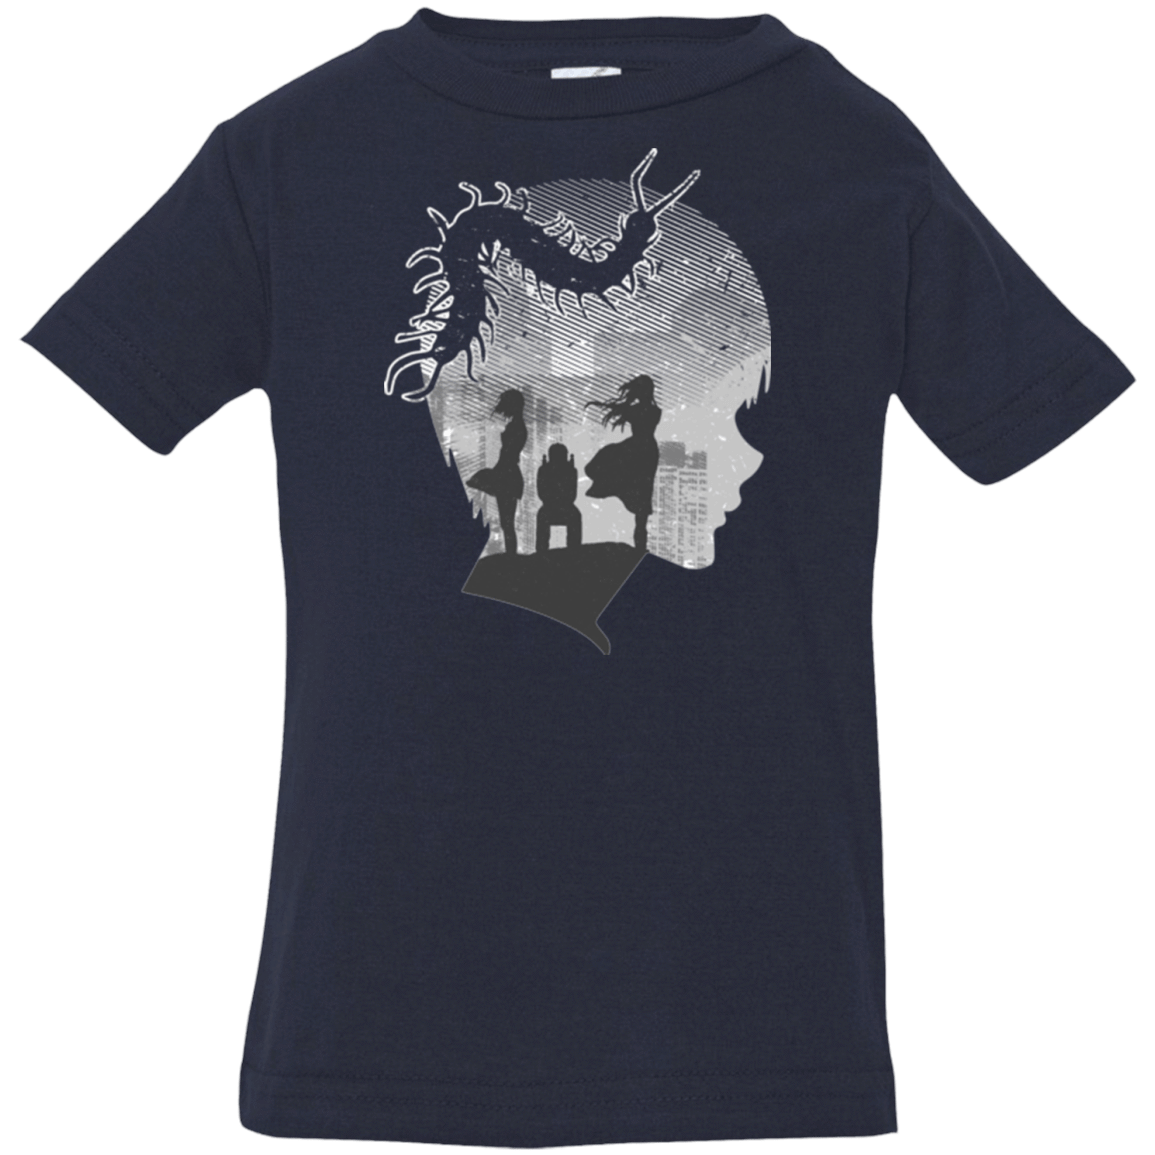 T-Shirts Navy / 6 Months Ghoul in Tokyo Infant Premium T-Shirt